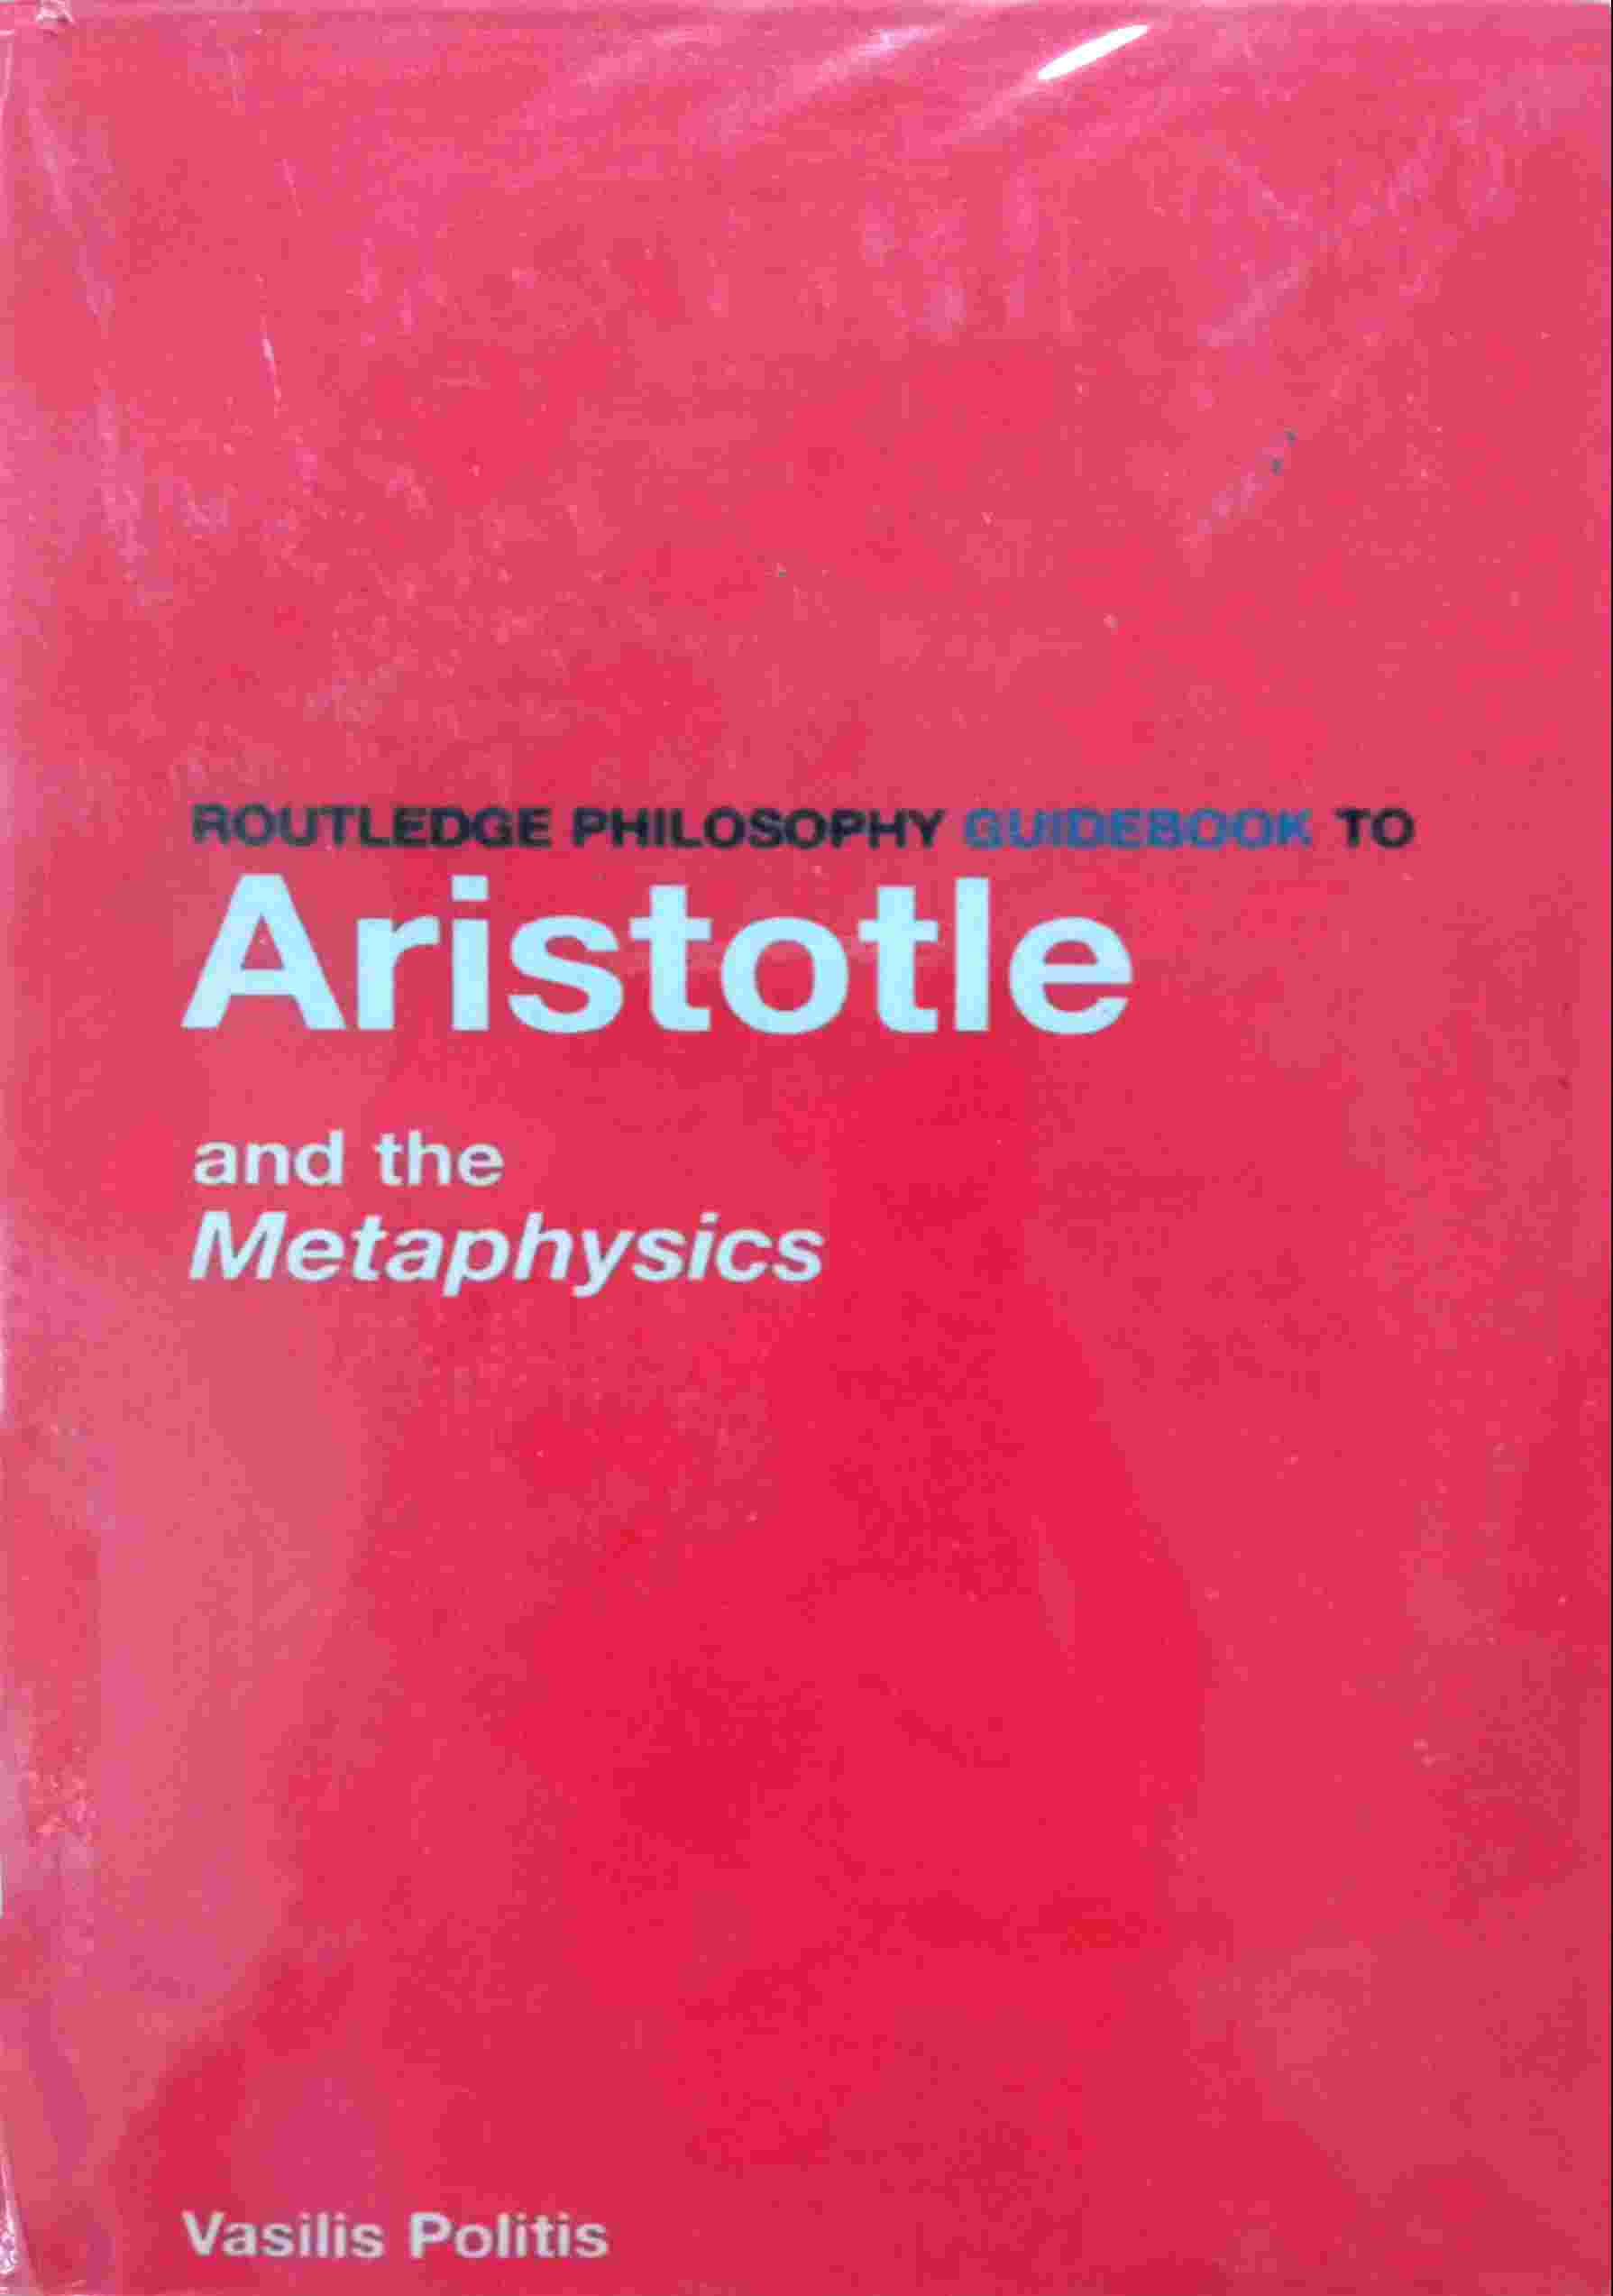 ARISTOTLE AND THE METAPHYSICS